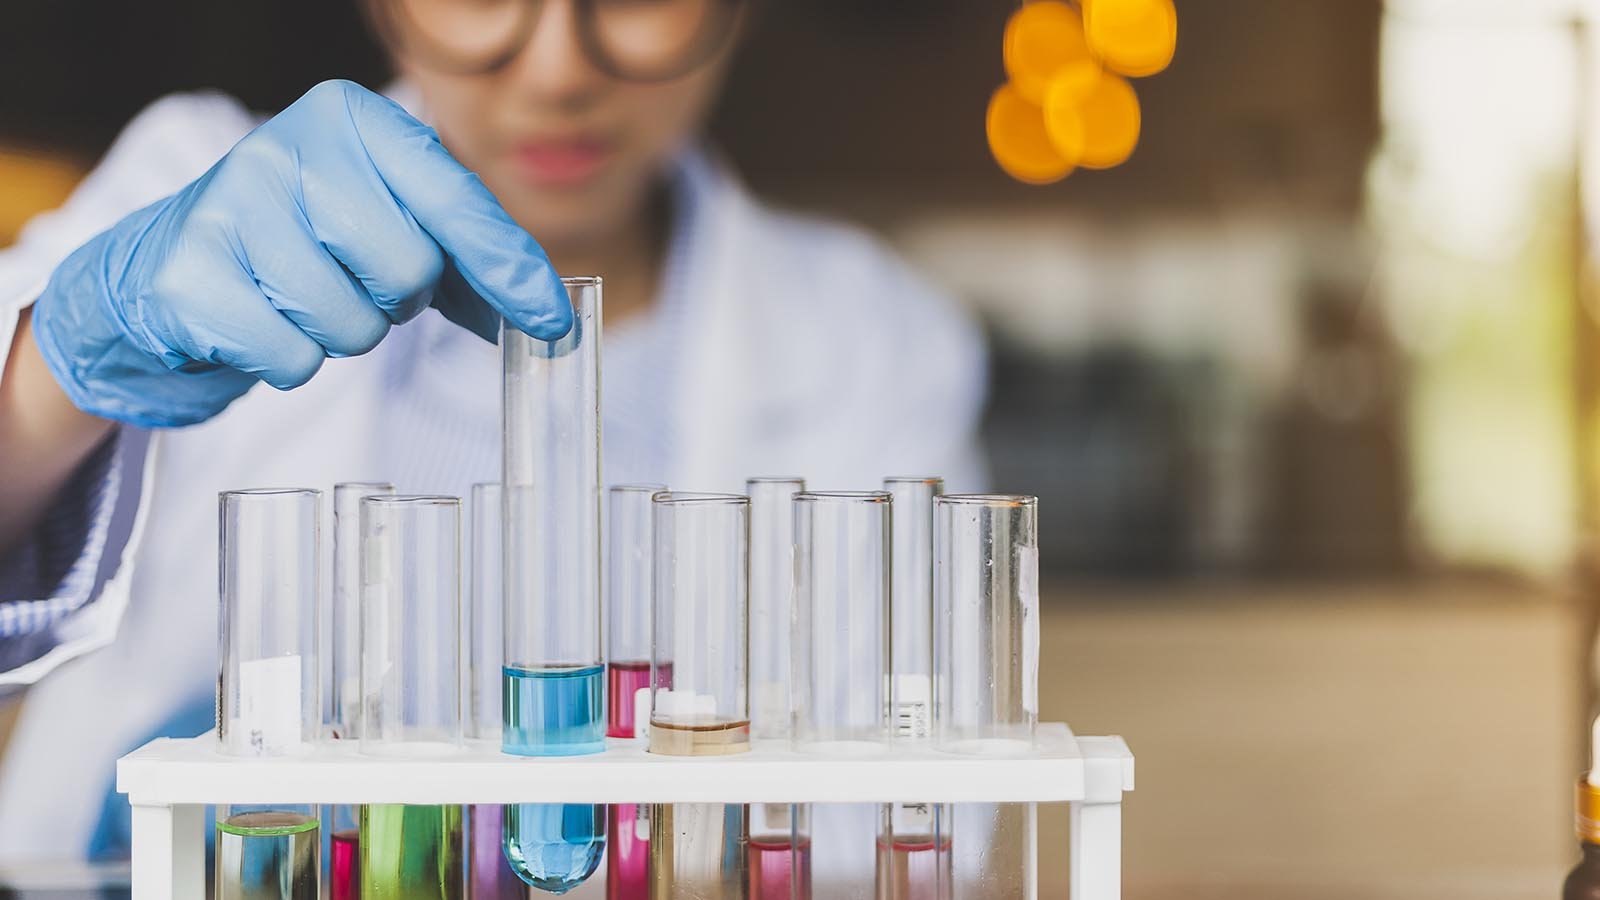 The 3 Most Promising Biotech Stocks to Own Now